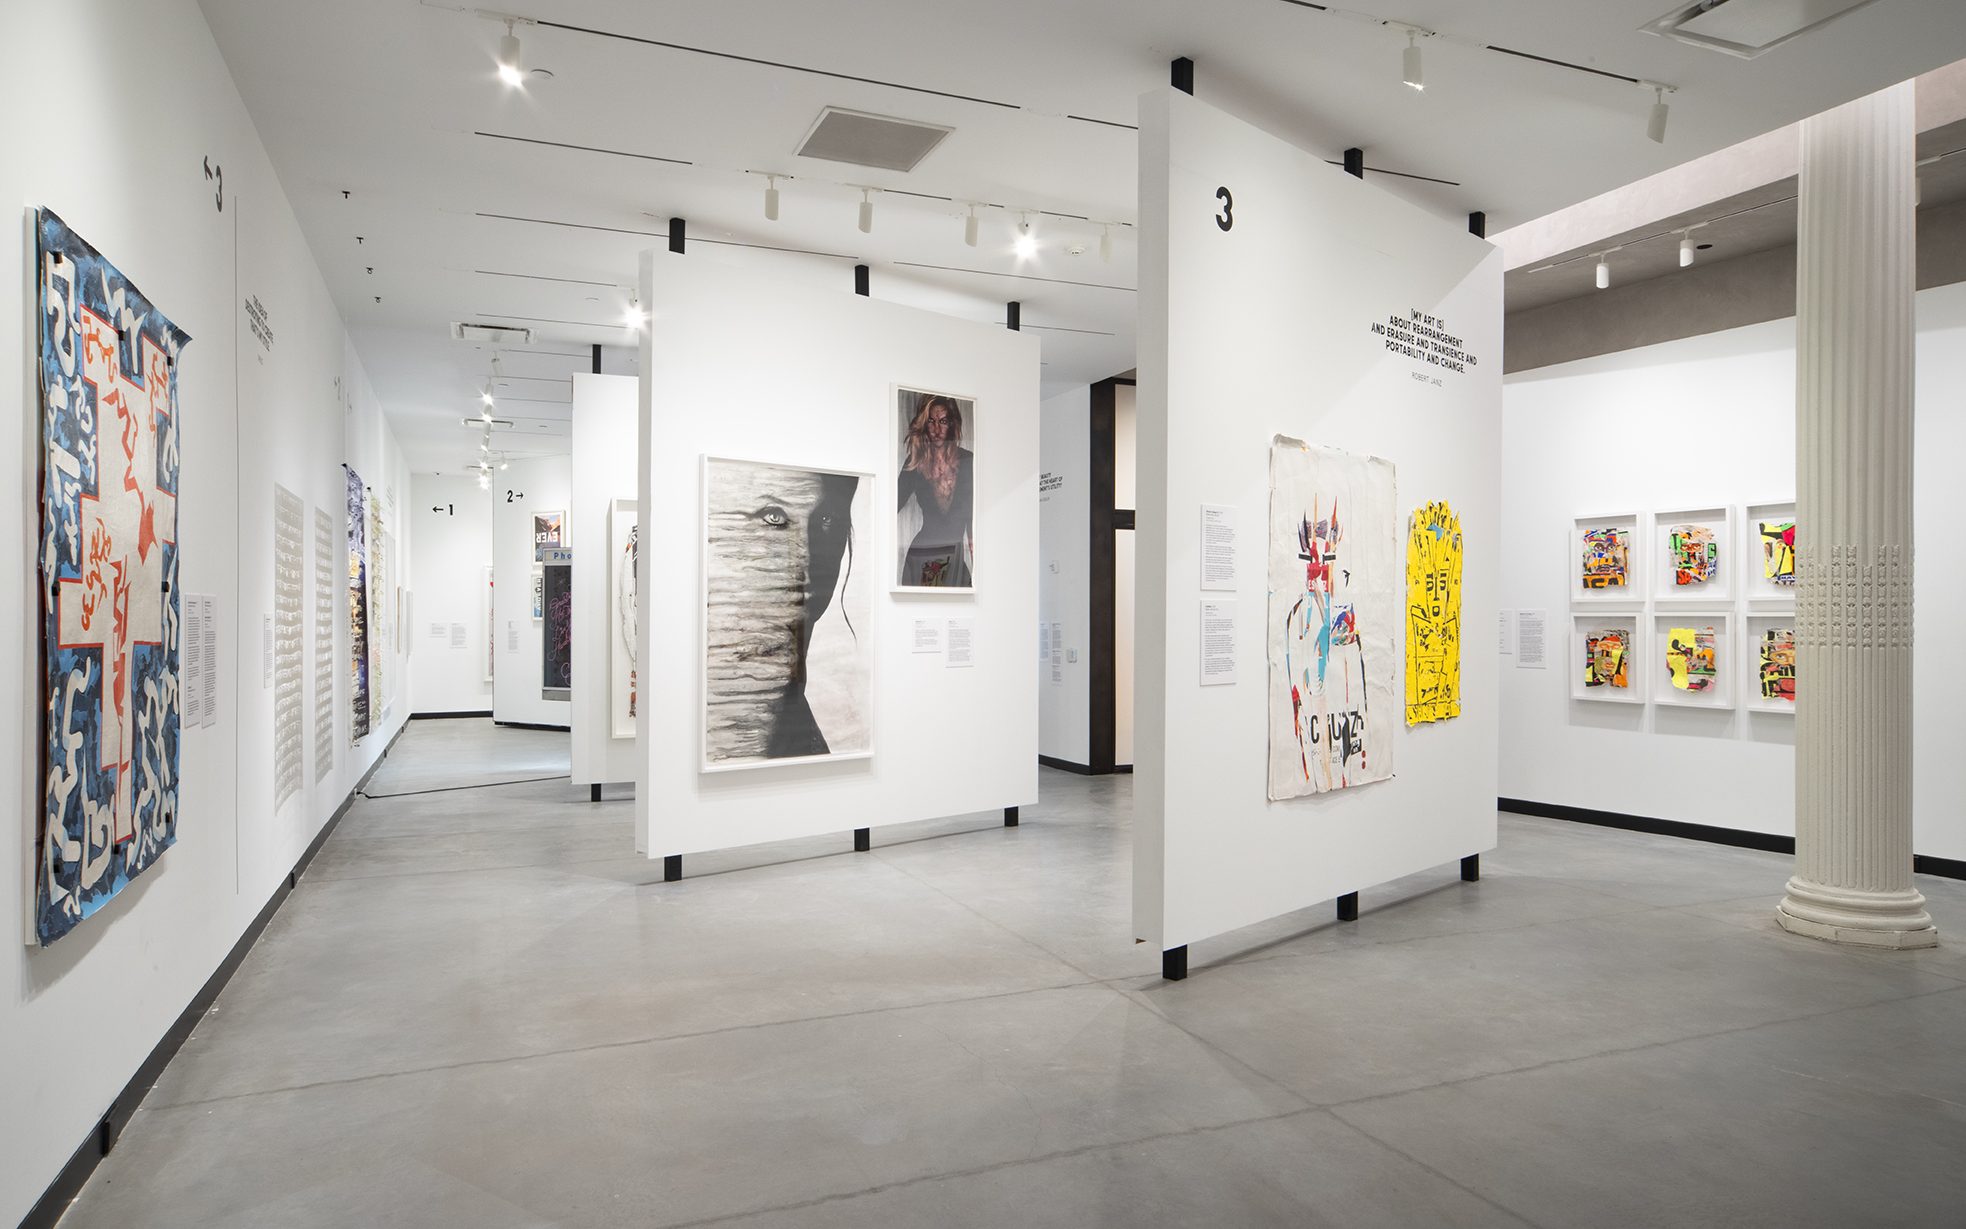 A gallery space with gray floors and white walls and white columns. Posters of mixed media styles line the outer walls and free-standing walls in the middle of the room.